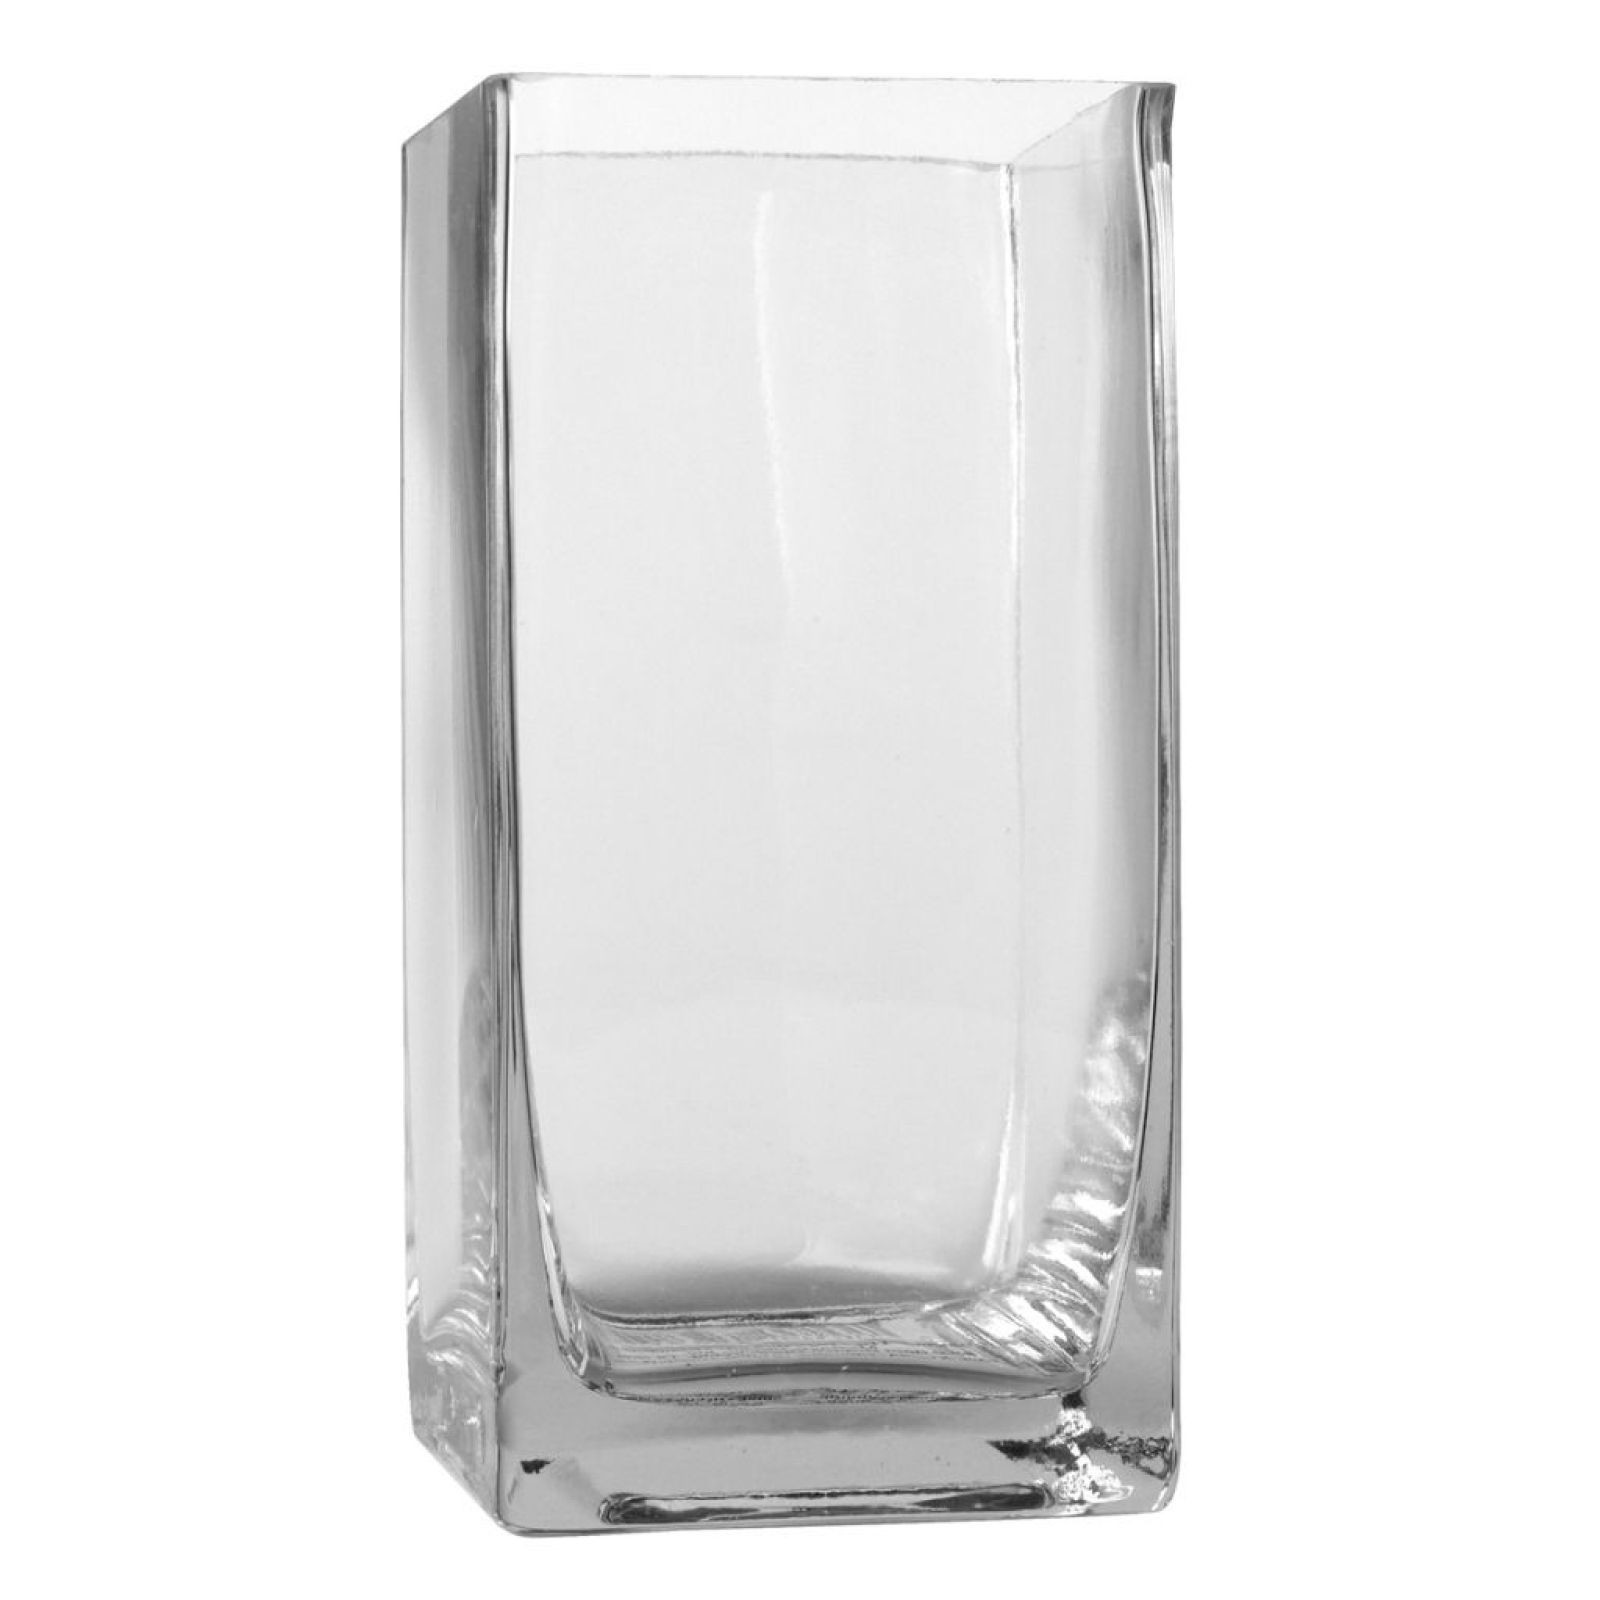 21 Famous 20 Inch Clear Glass Cylinder Vase 2024 free download 20 inch clear glass cylinder vase of ashland tall cube glass vase cube and glass for ashlanda tall cube glass vase 6